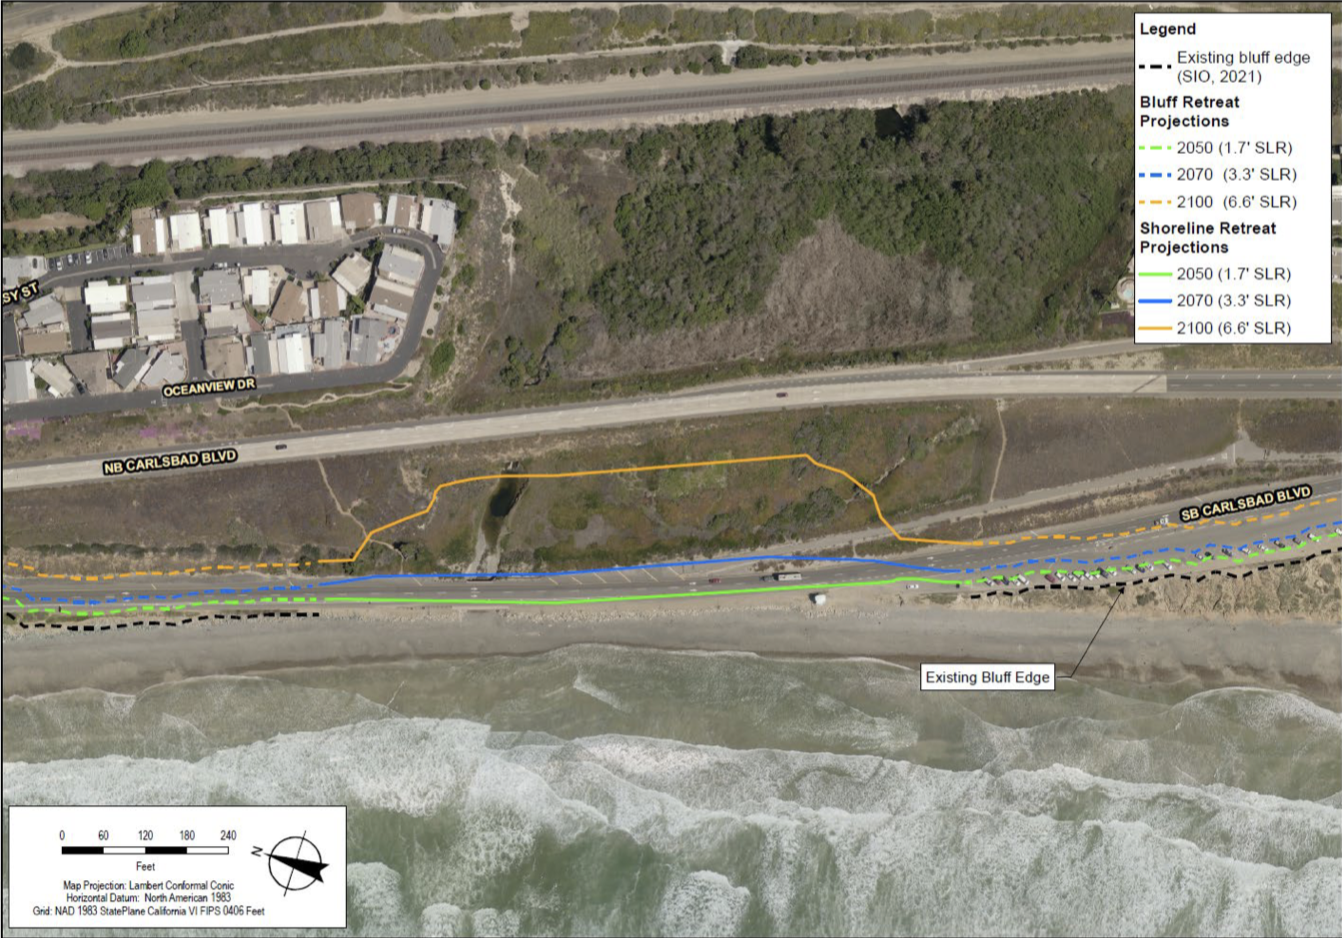 An overhead view of the beach at Las Encinas creek, with 3 superimposed lines to denote where the beach can migrate to under 1.7 feet, 3.3 feet, and 6.6 feet of sea level rise. Even with 6.6 feet, the beach is still seaward of norhtbound Carlsbad boulevard.